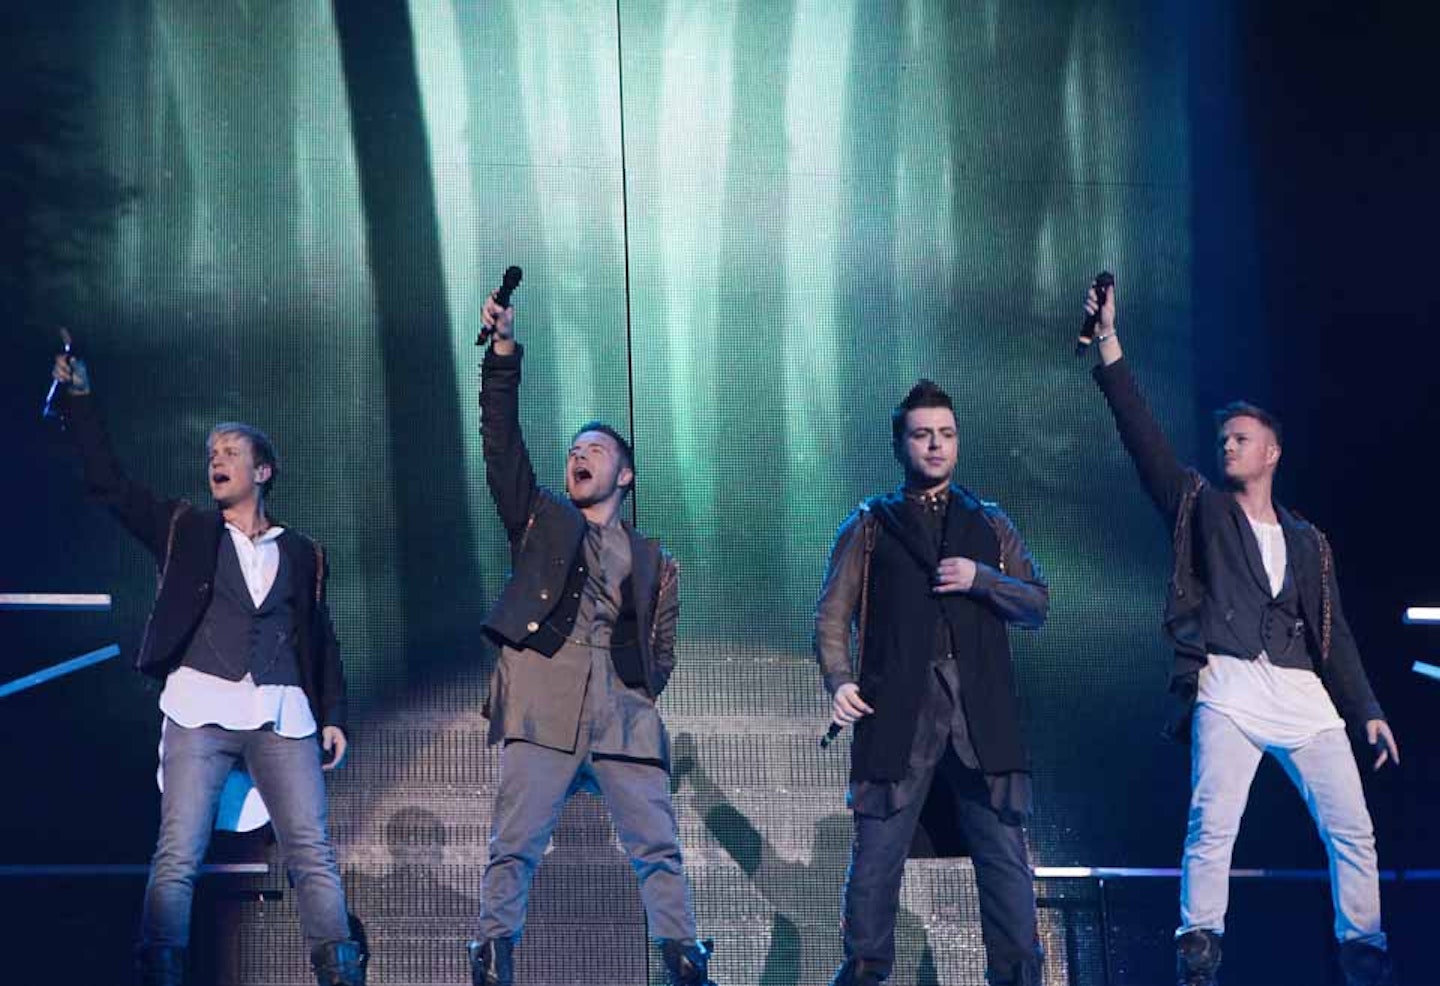 estlife perform on stage during the band's farewell tour at O2 Arena (2012)